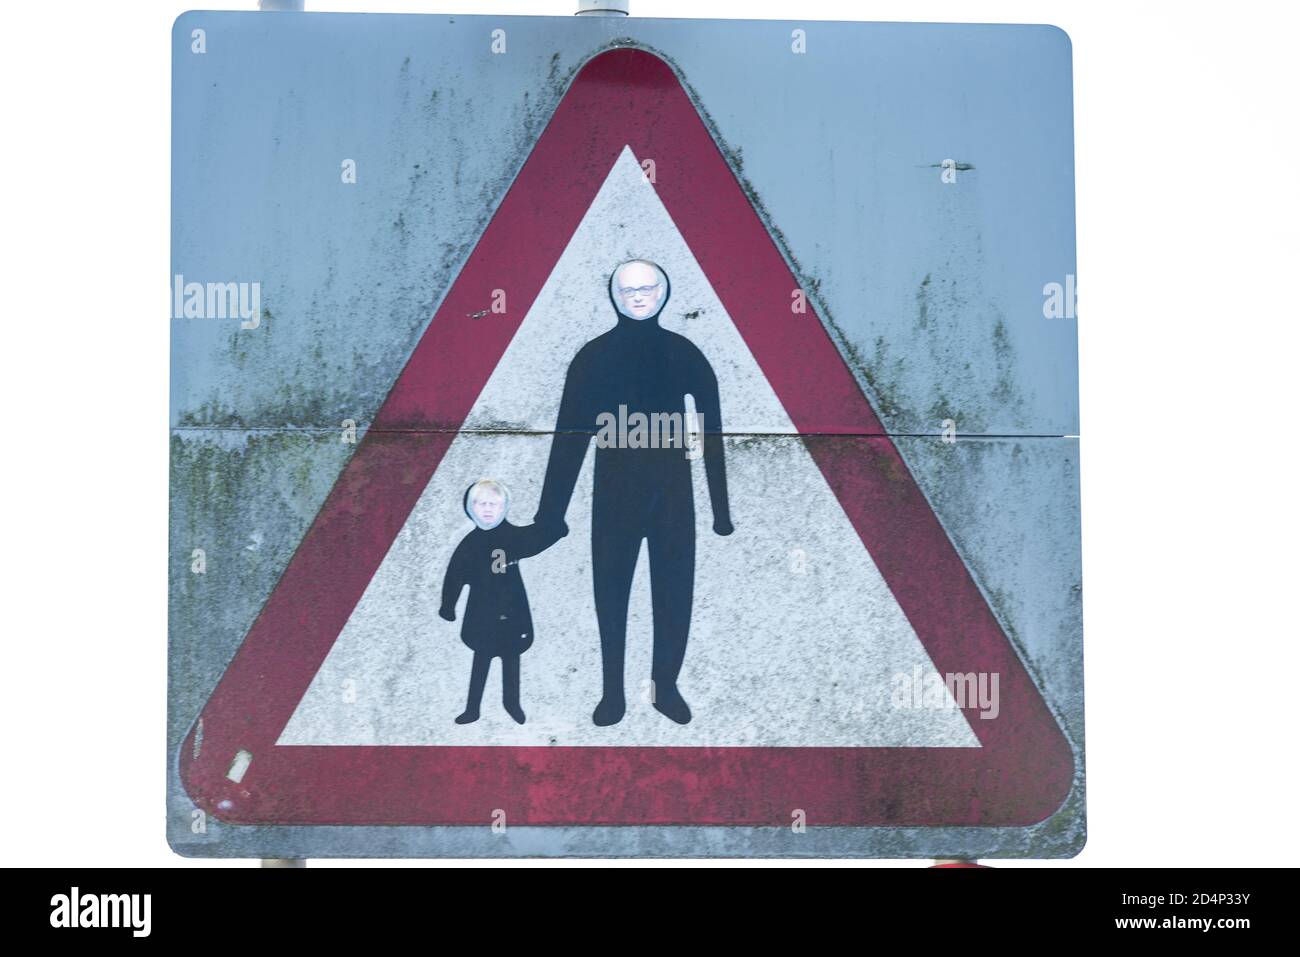 Political comment made by adding faces of Boris Johnson and Dominic Cummings to adult and child crossing, pedestrians in road traffic sign Stock Photo